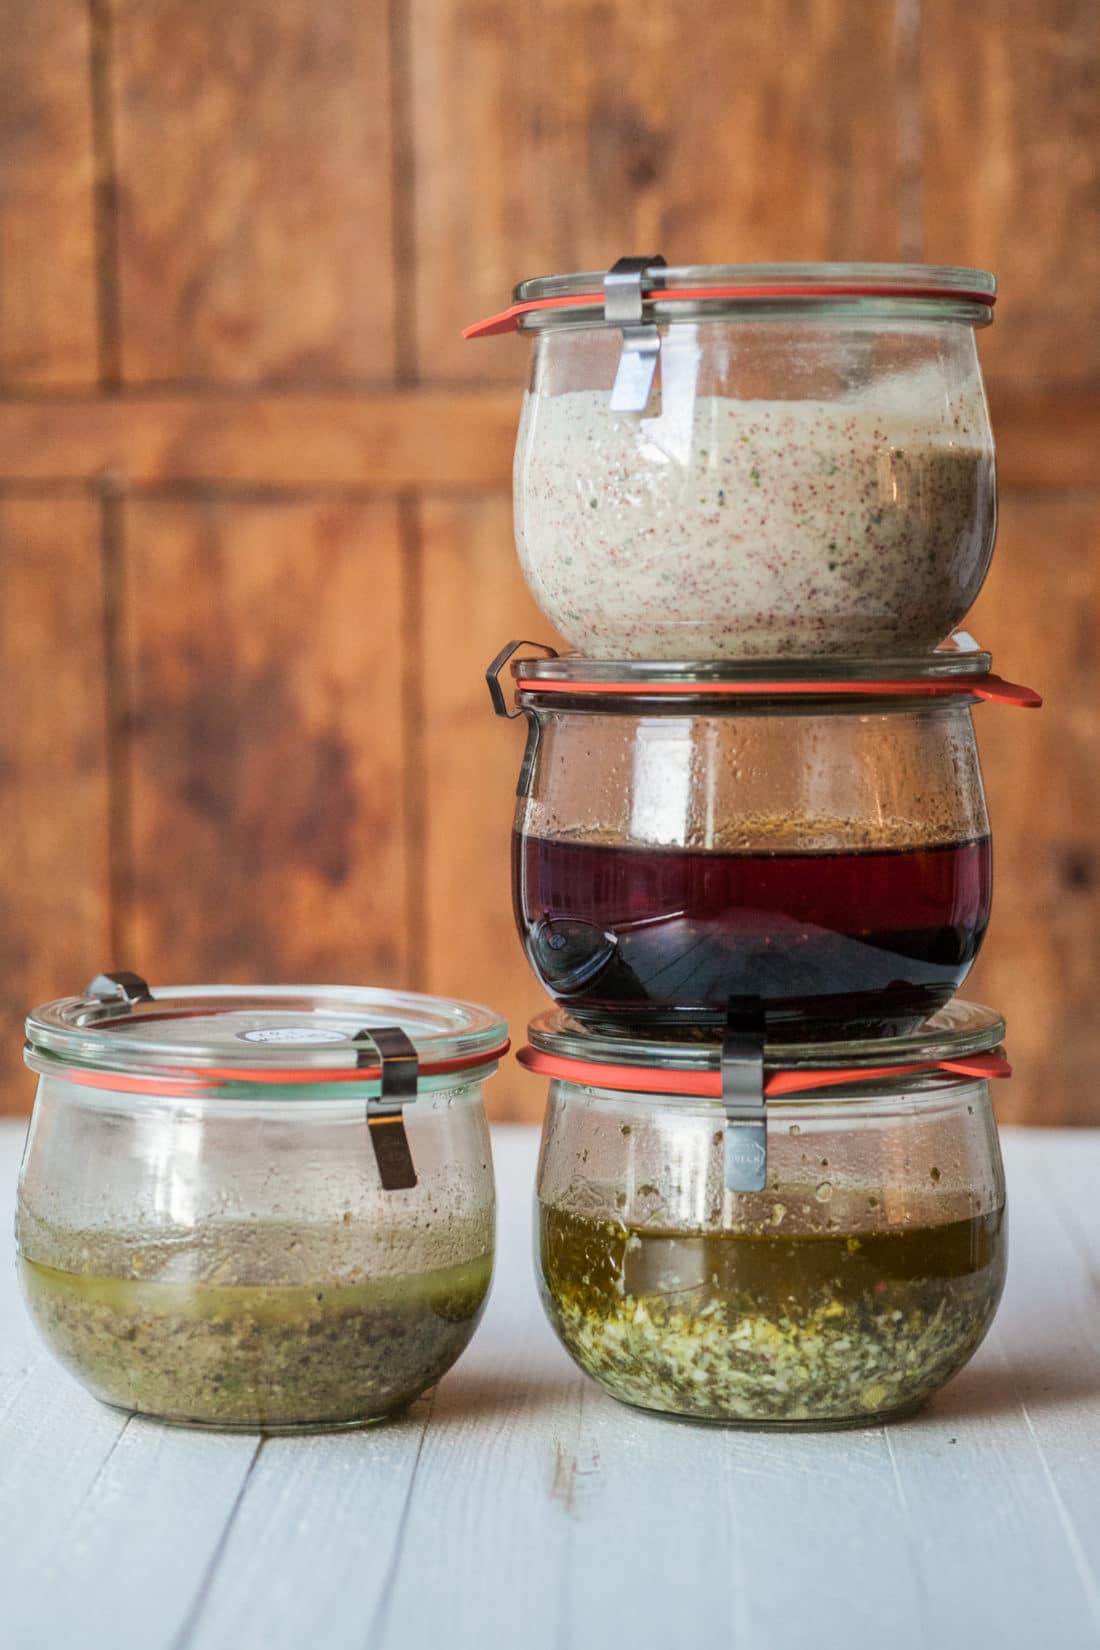 Four marinades in jars stacked on wood counter.